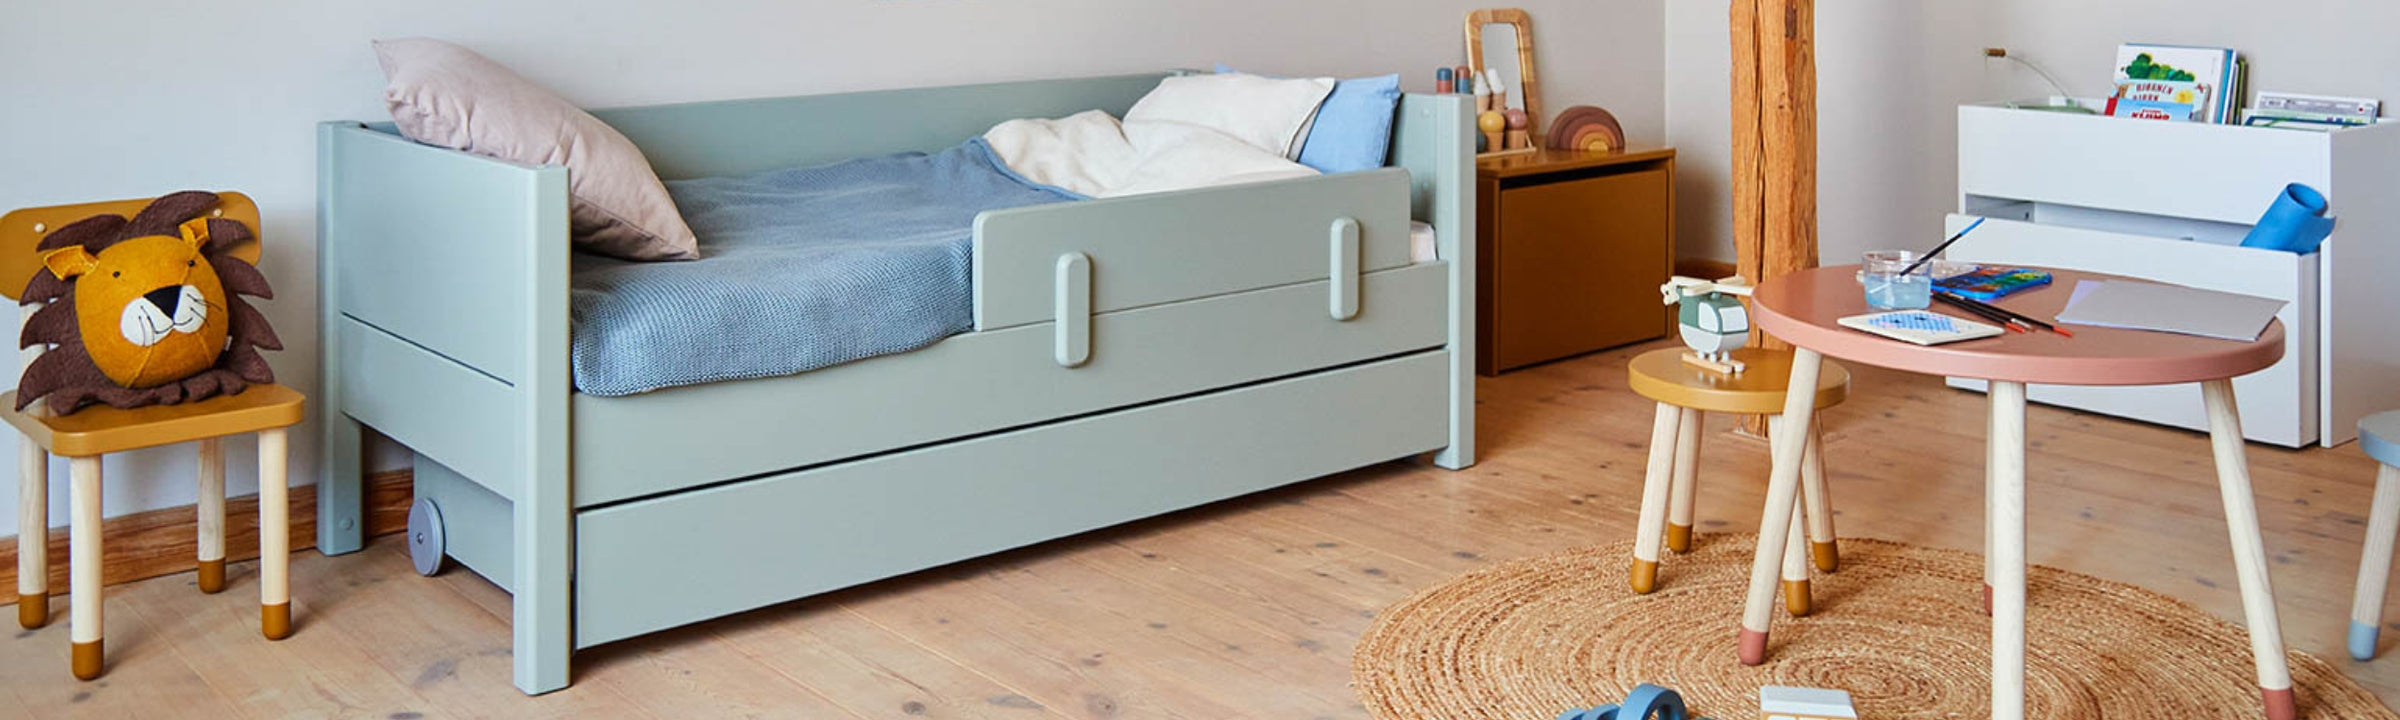 Room with a junior bed from FLEXA